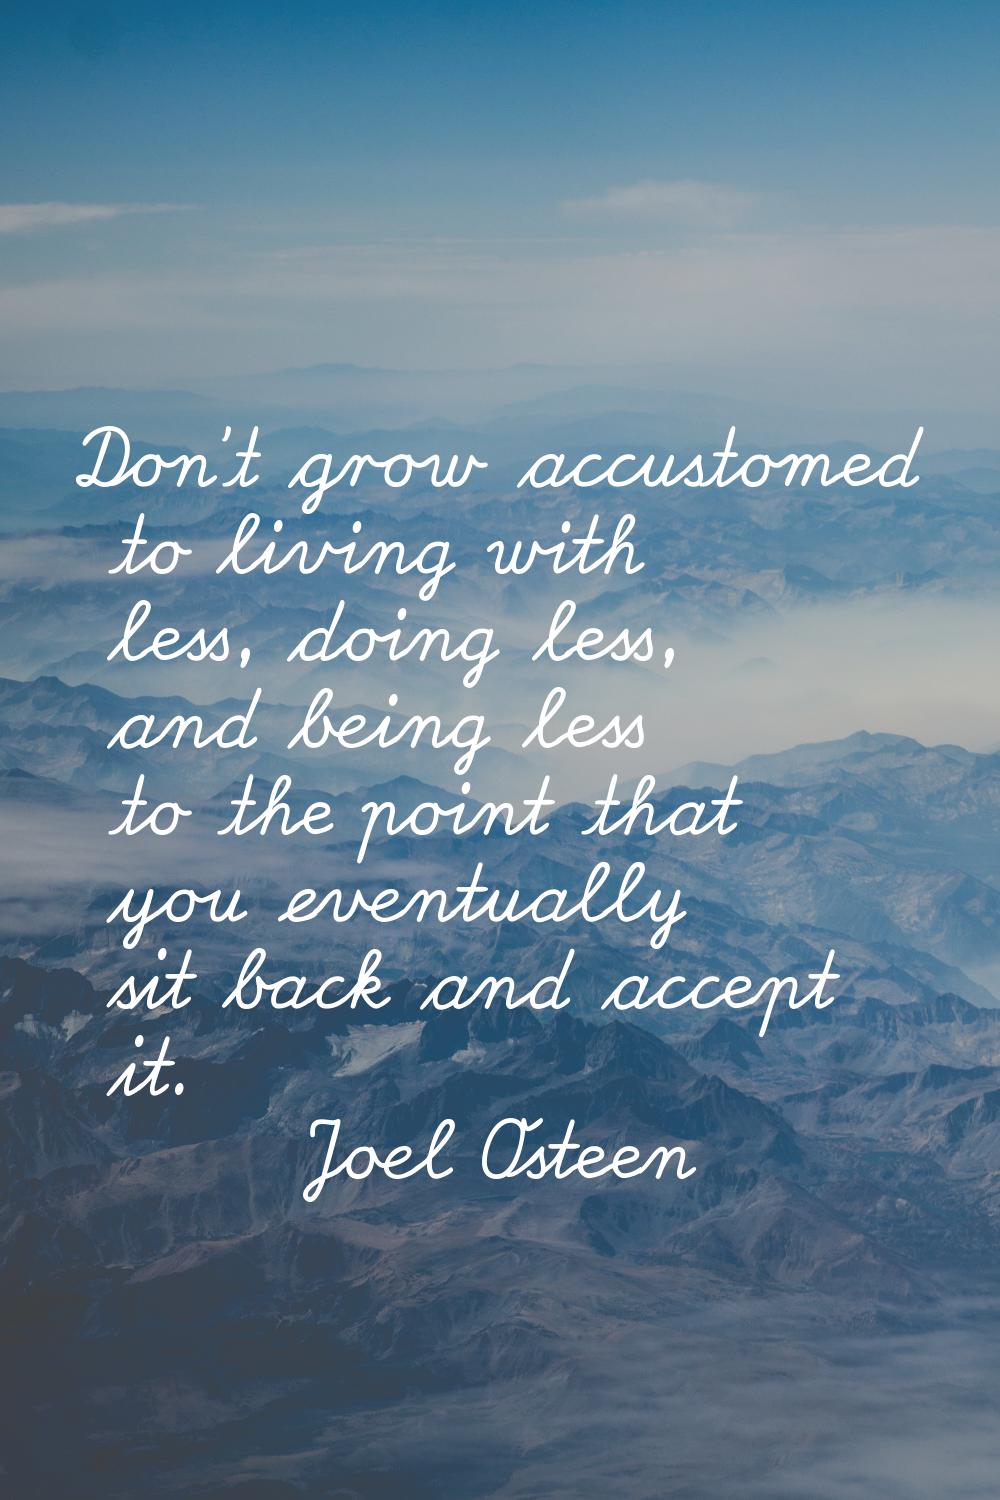 Don't grow accustomed to living with less, doing less, and being less to the point that you eventua